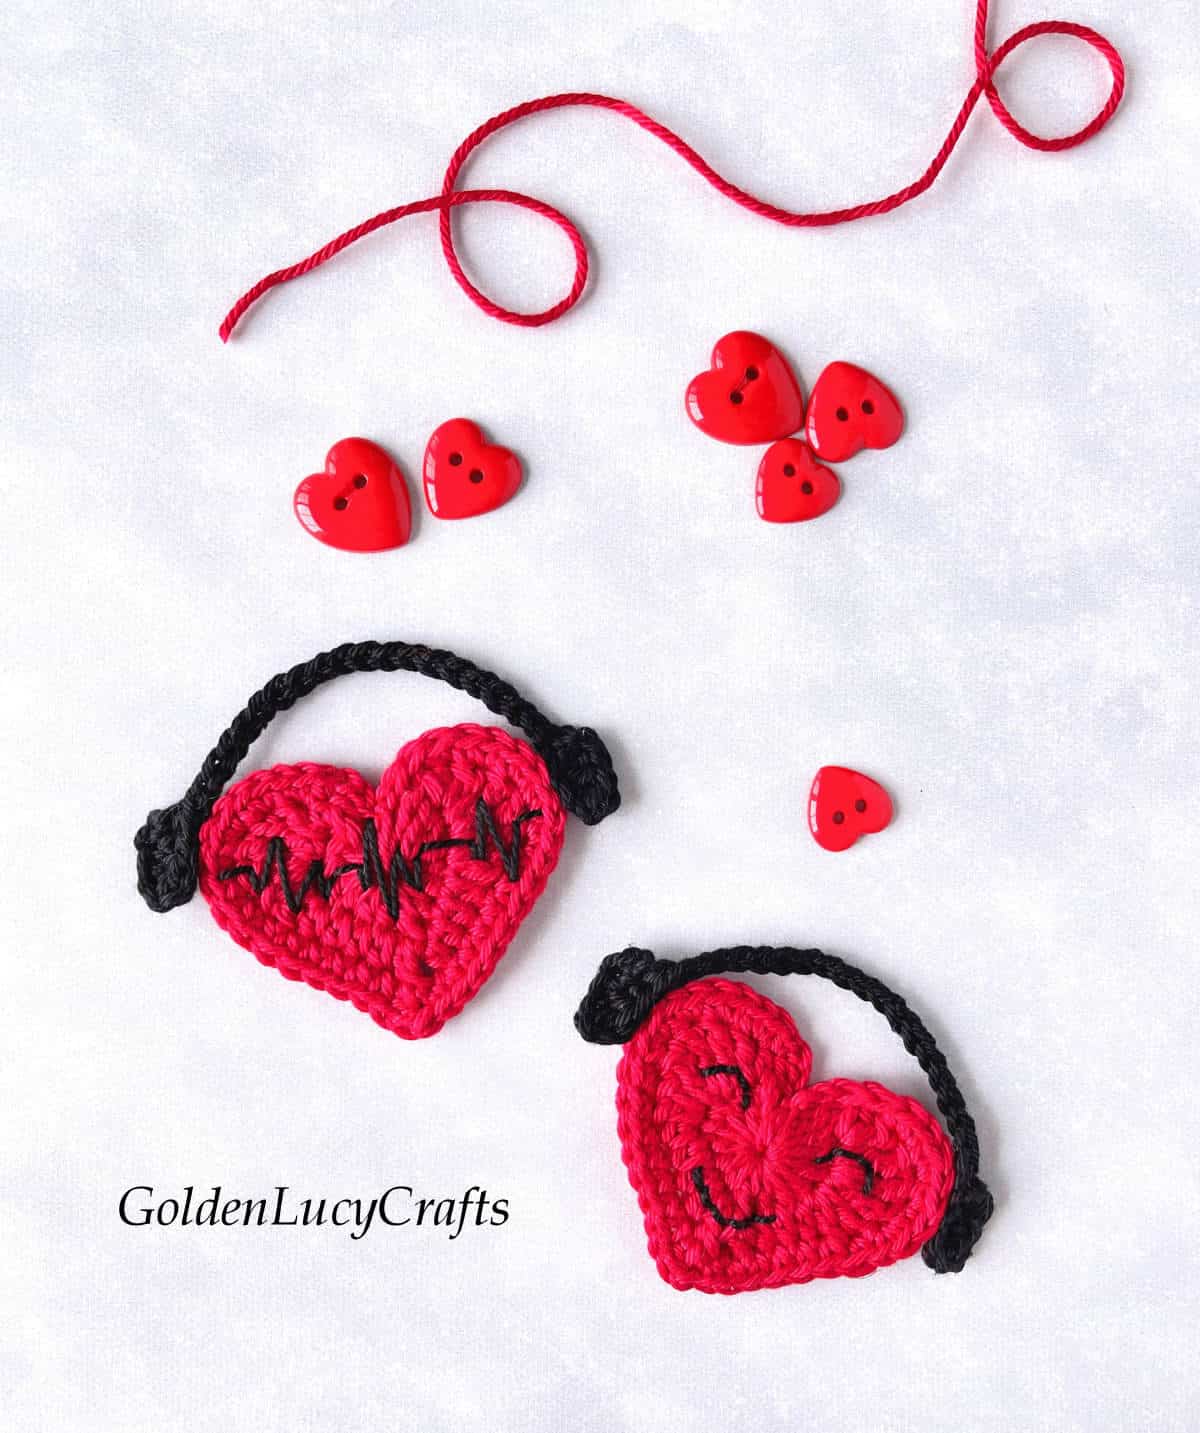 Crochet two red hearts with headphones.